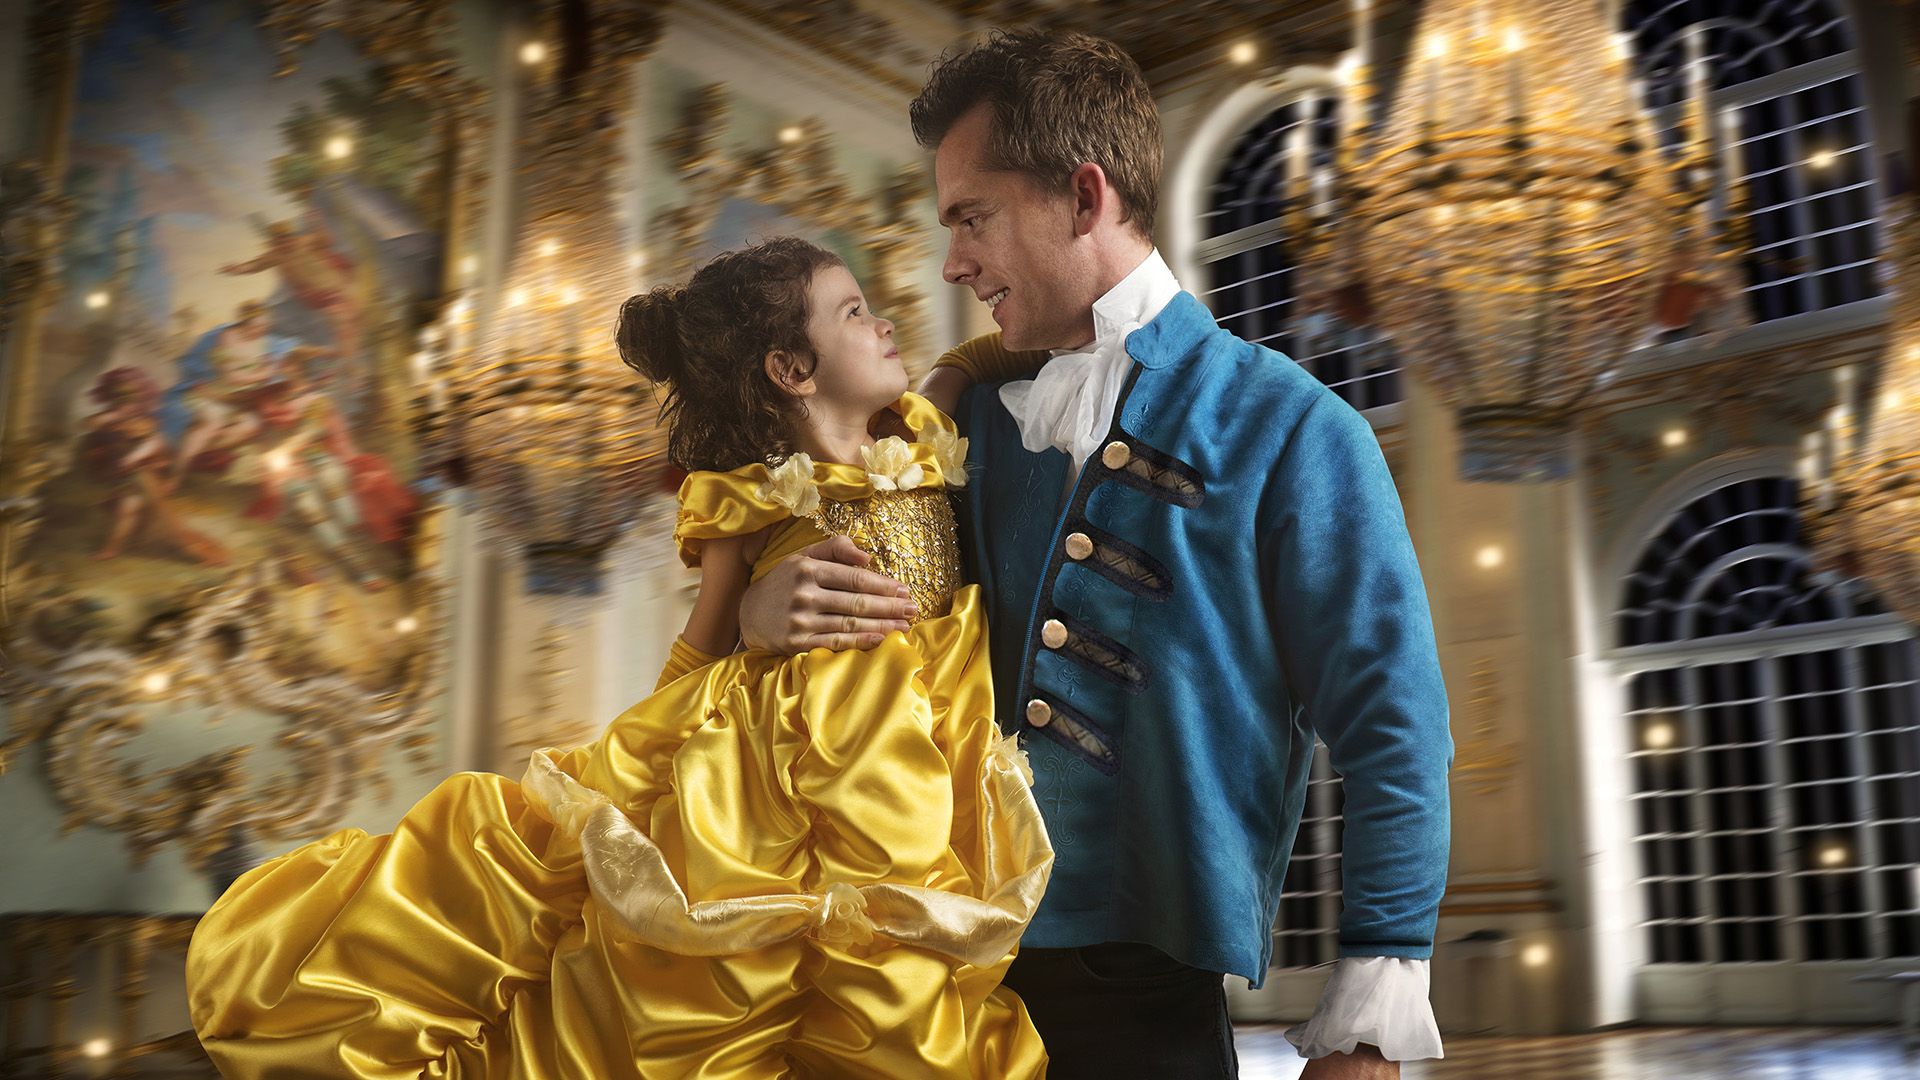 Dad stages epic 'Beauty and the Beast' shoot for daughter